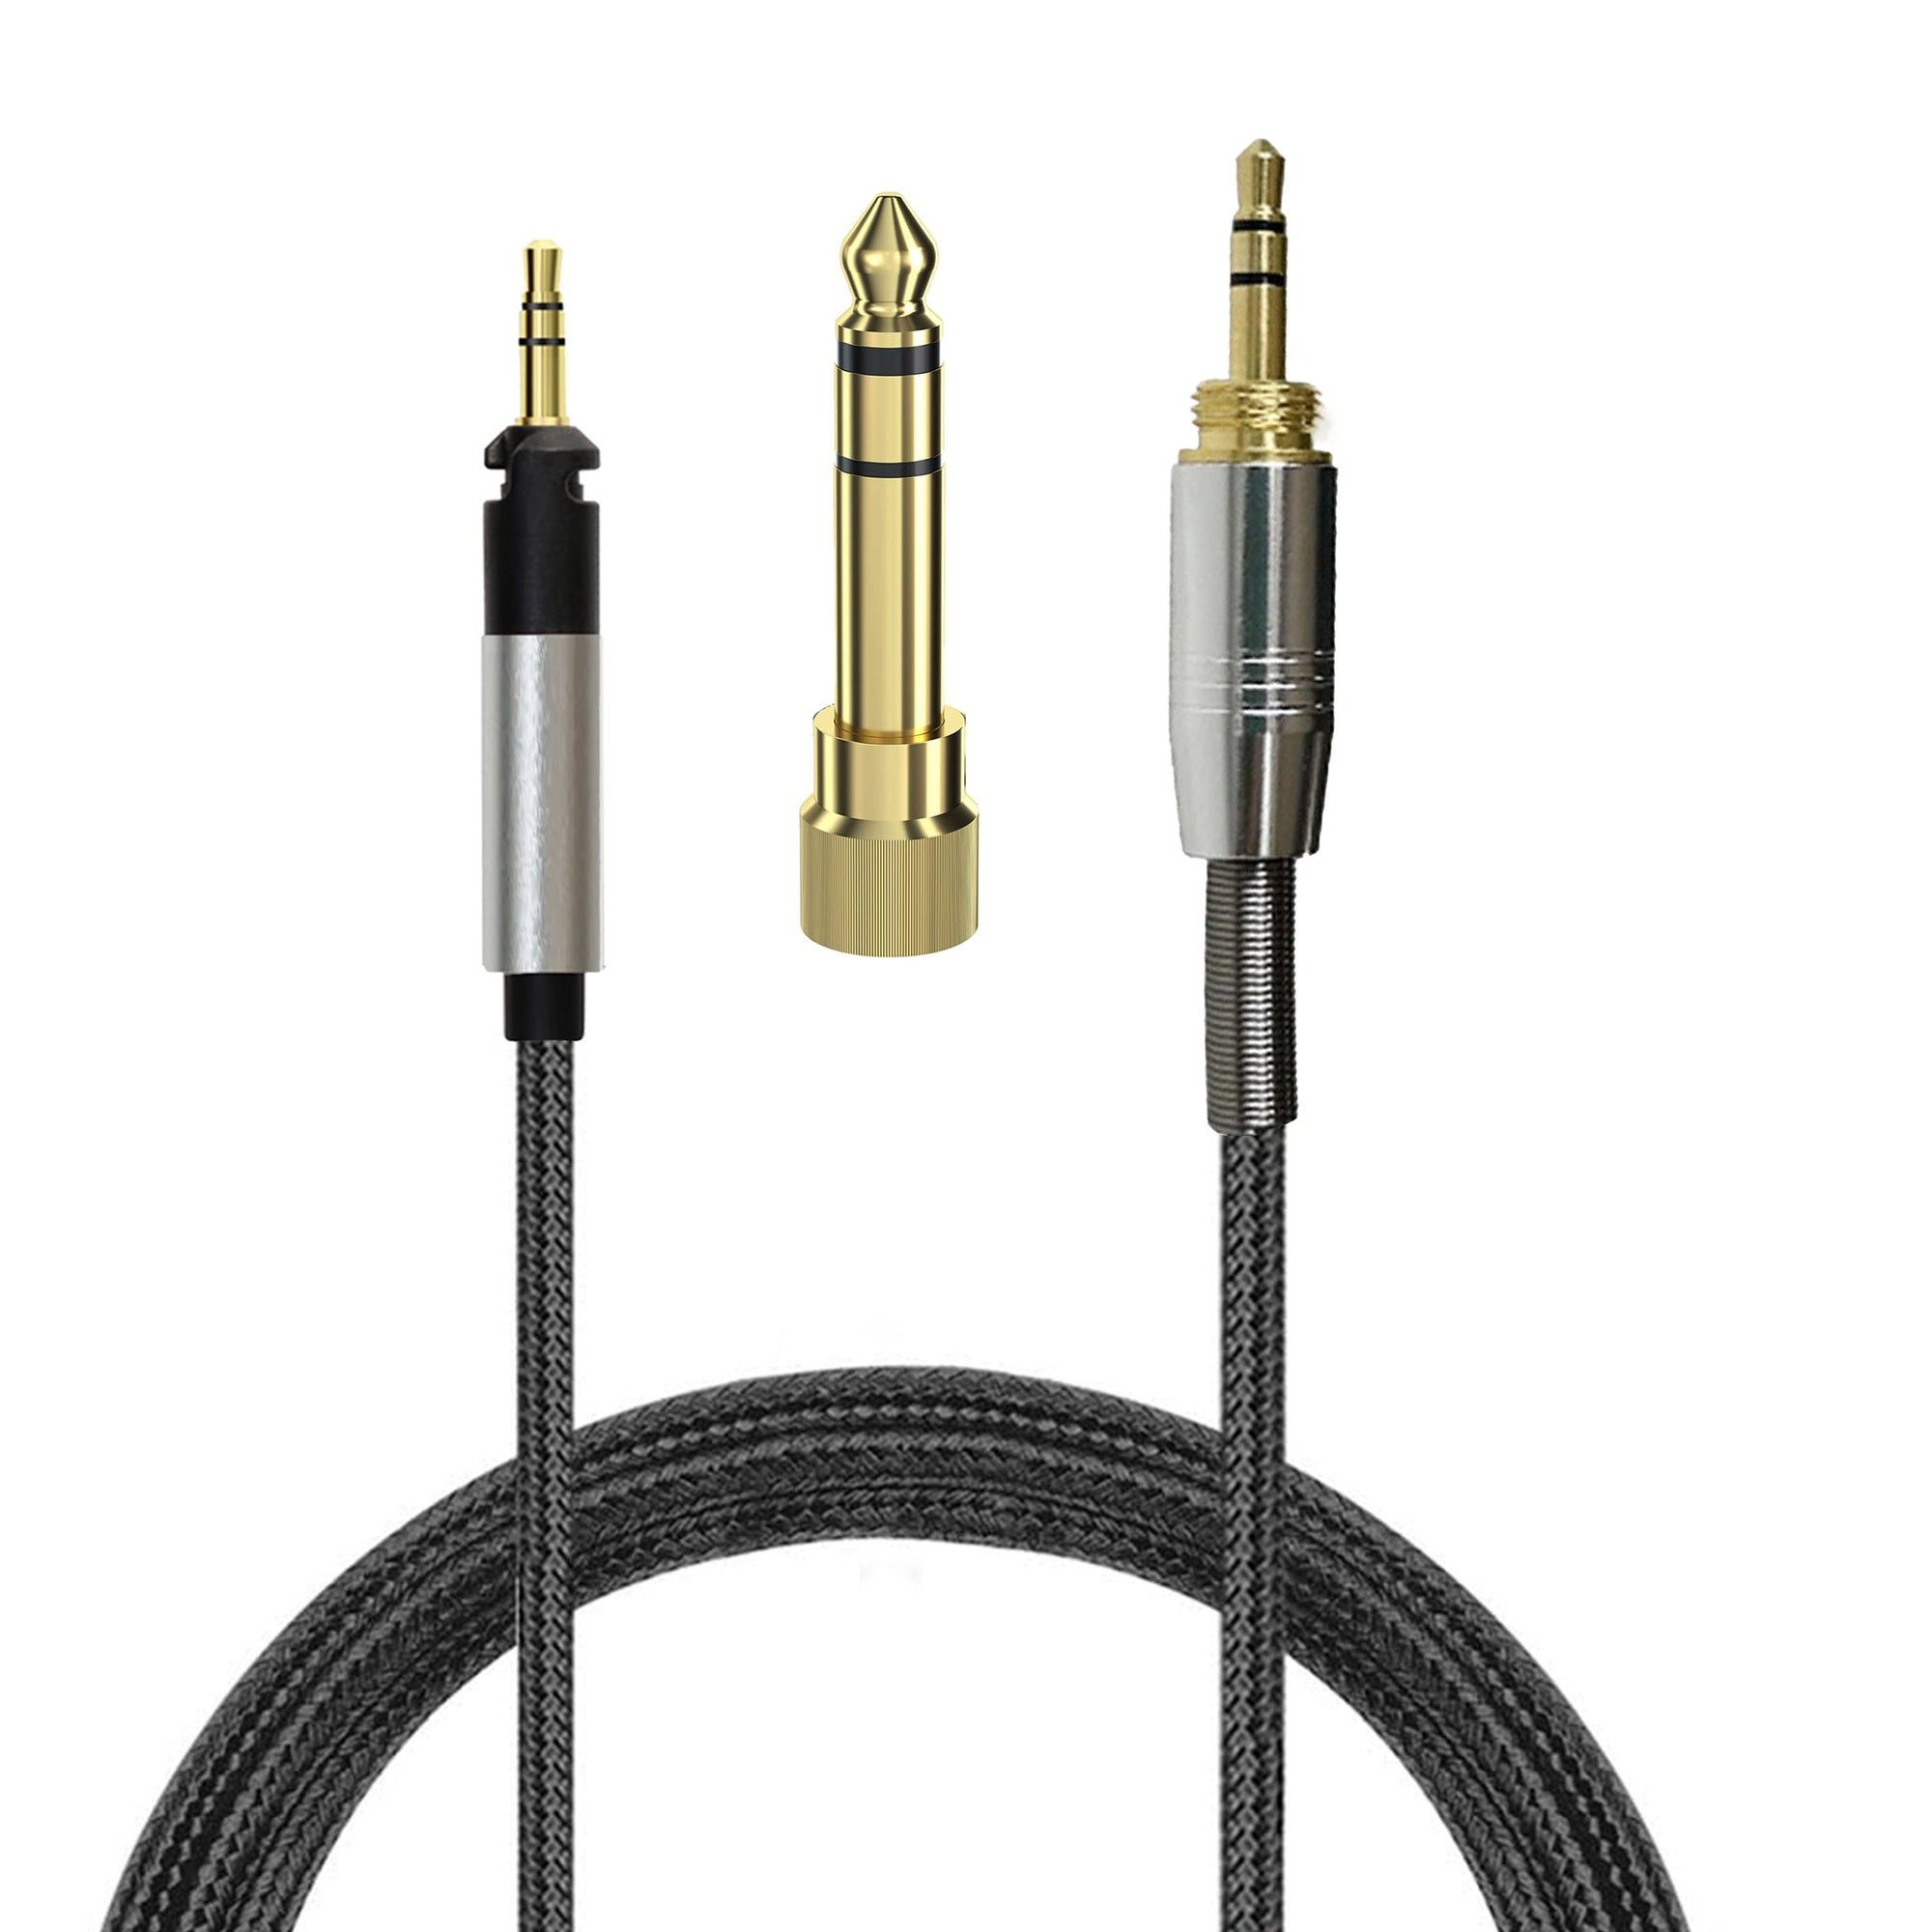 Replacement Cable for Sennheiser HD518, HD558, HD598Cs, HD598, HD599, HD569 & HD579 headsets, With ¼” (6.35mm) Audio Adapter - 2M / 78”